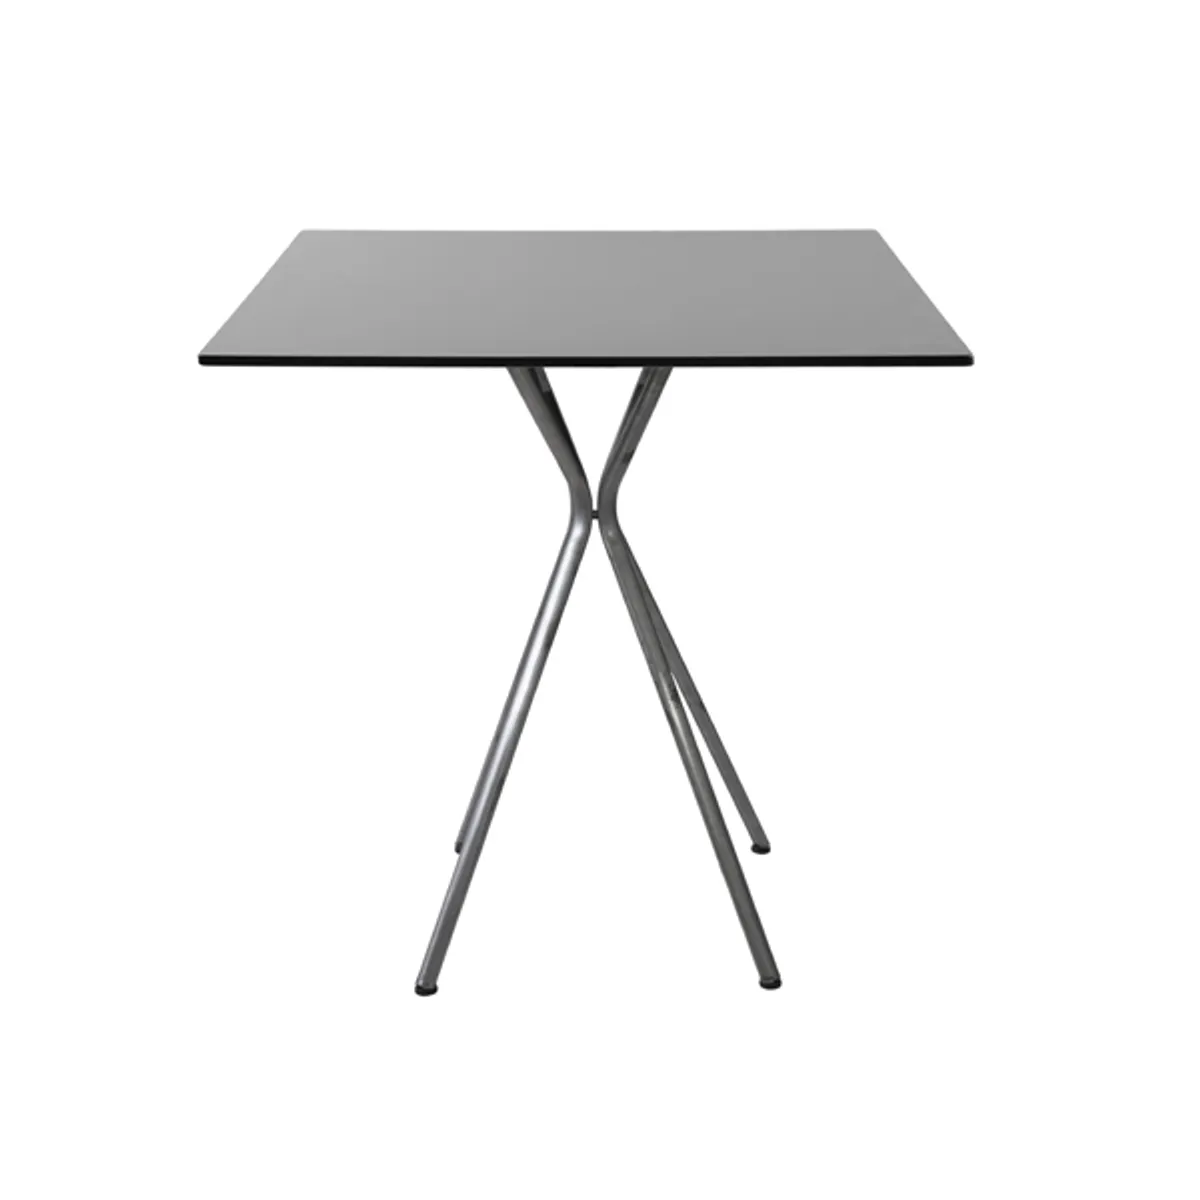 Carola square table Inside Out Contracts2